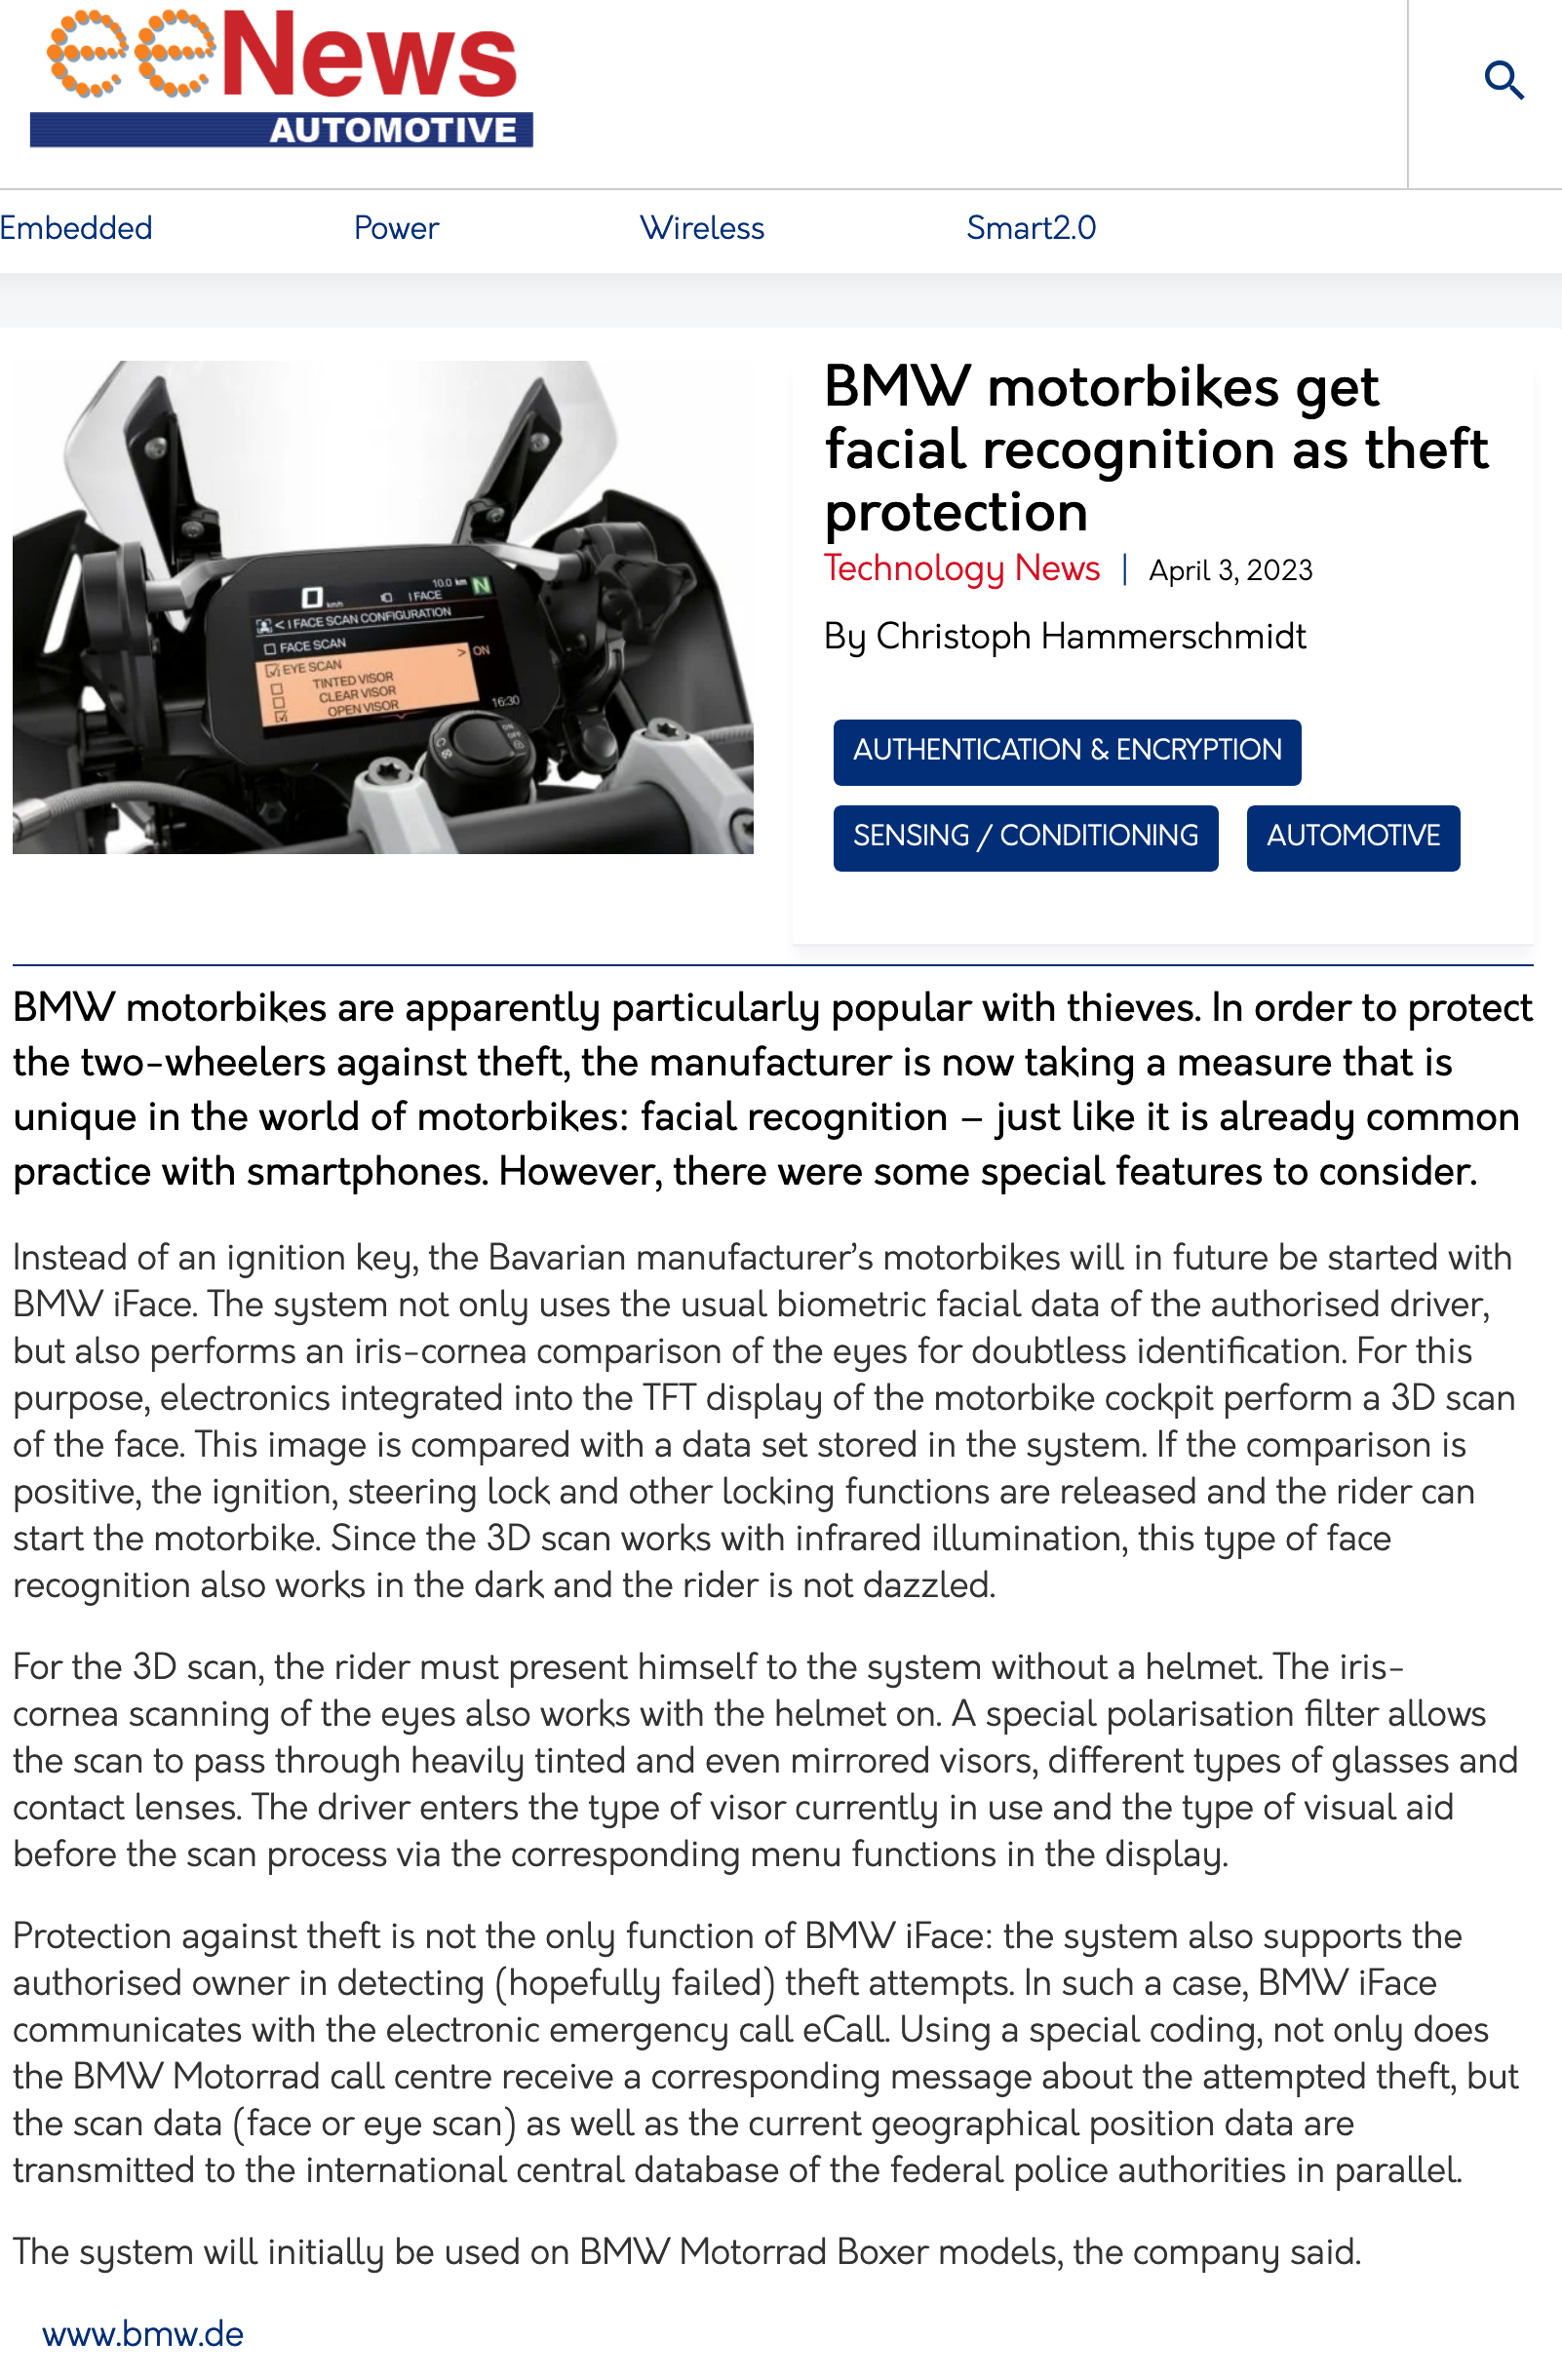 Screenshot 2023-04-05 at 14-53-25 BMW motorbikes get facial recognition as theft protection.png